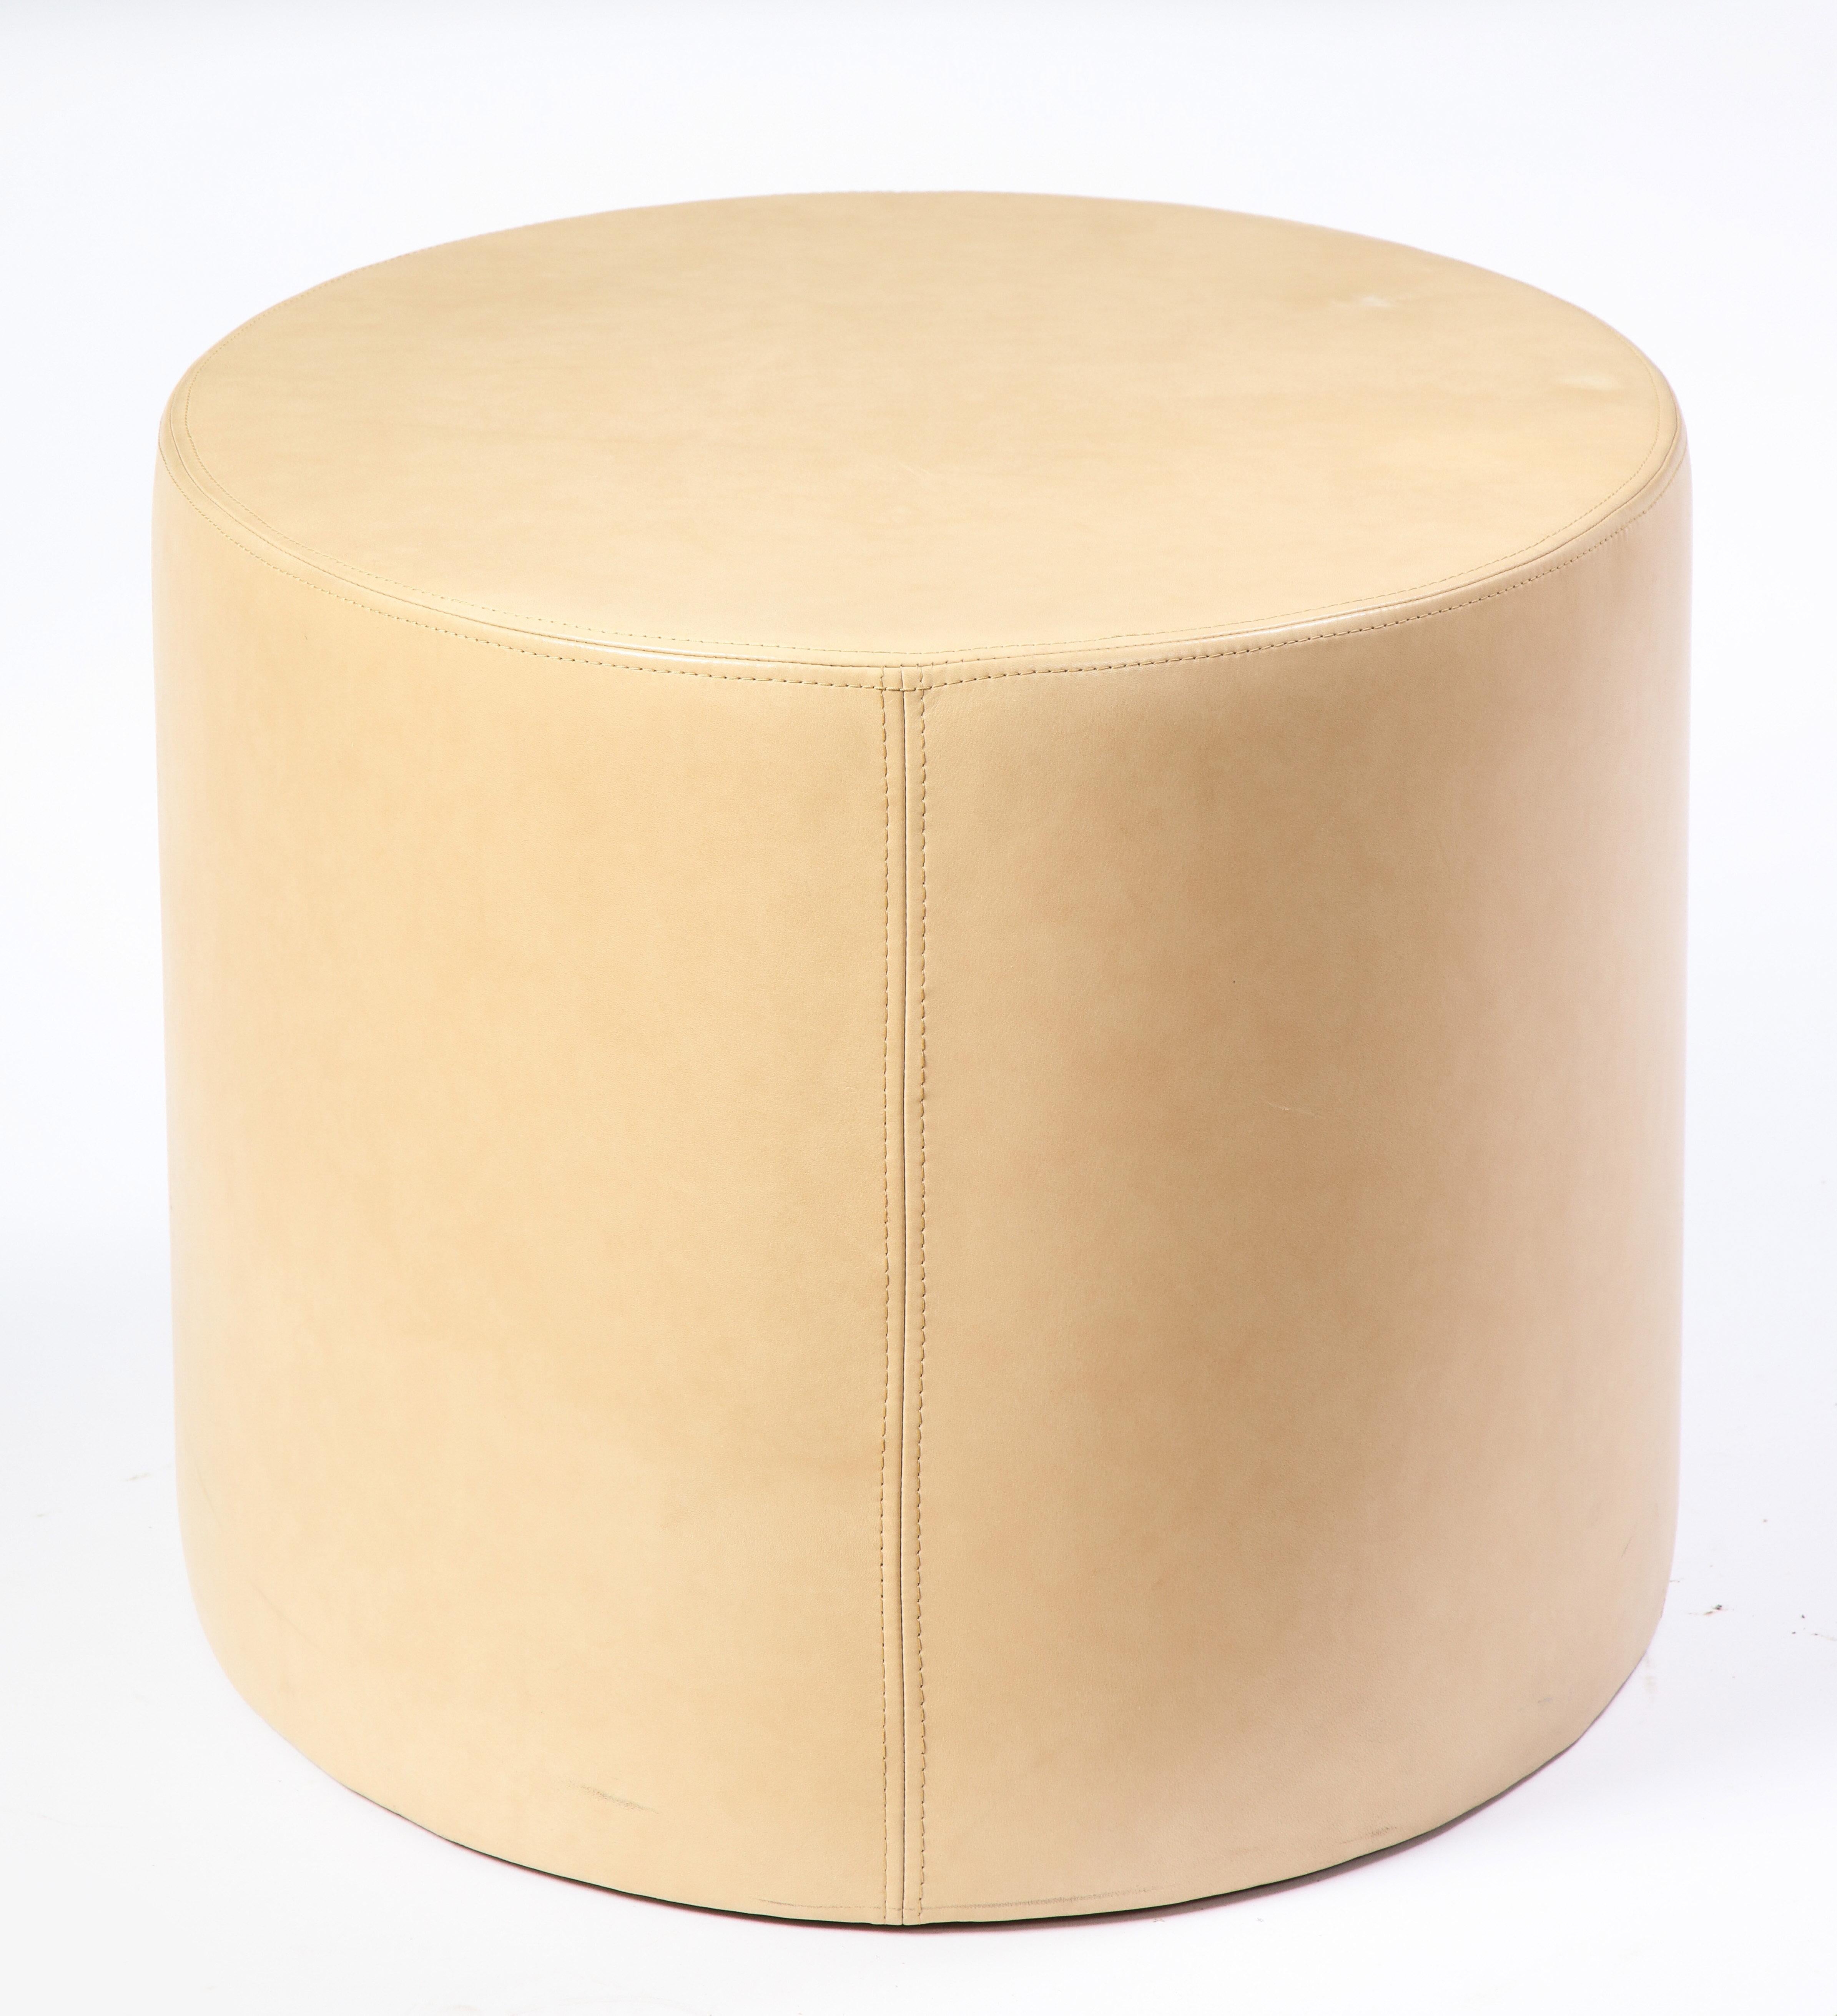 20th Century Cream-Colored Low Table Upholstered in Leather, Modern For Sale